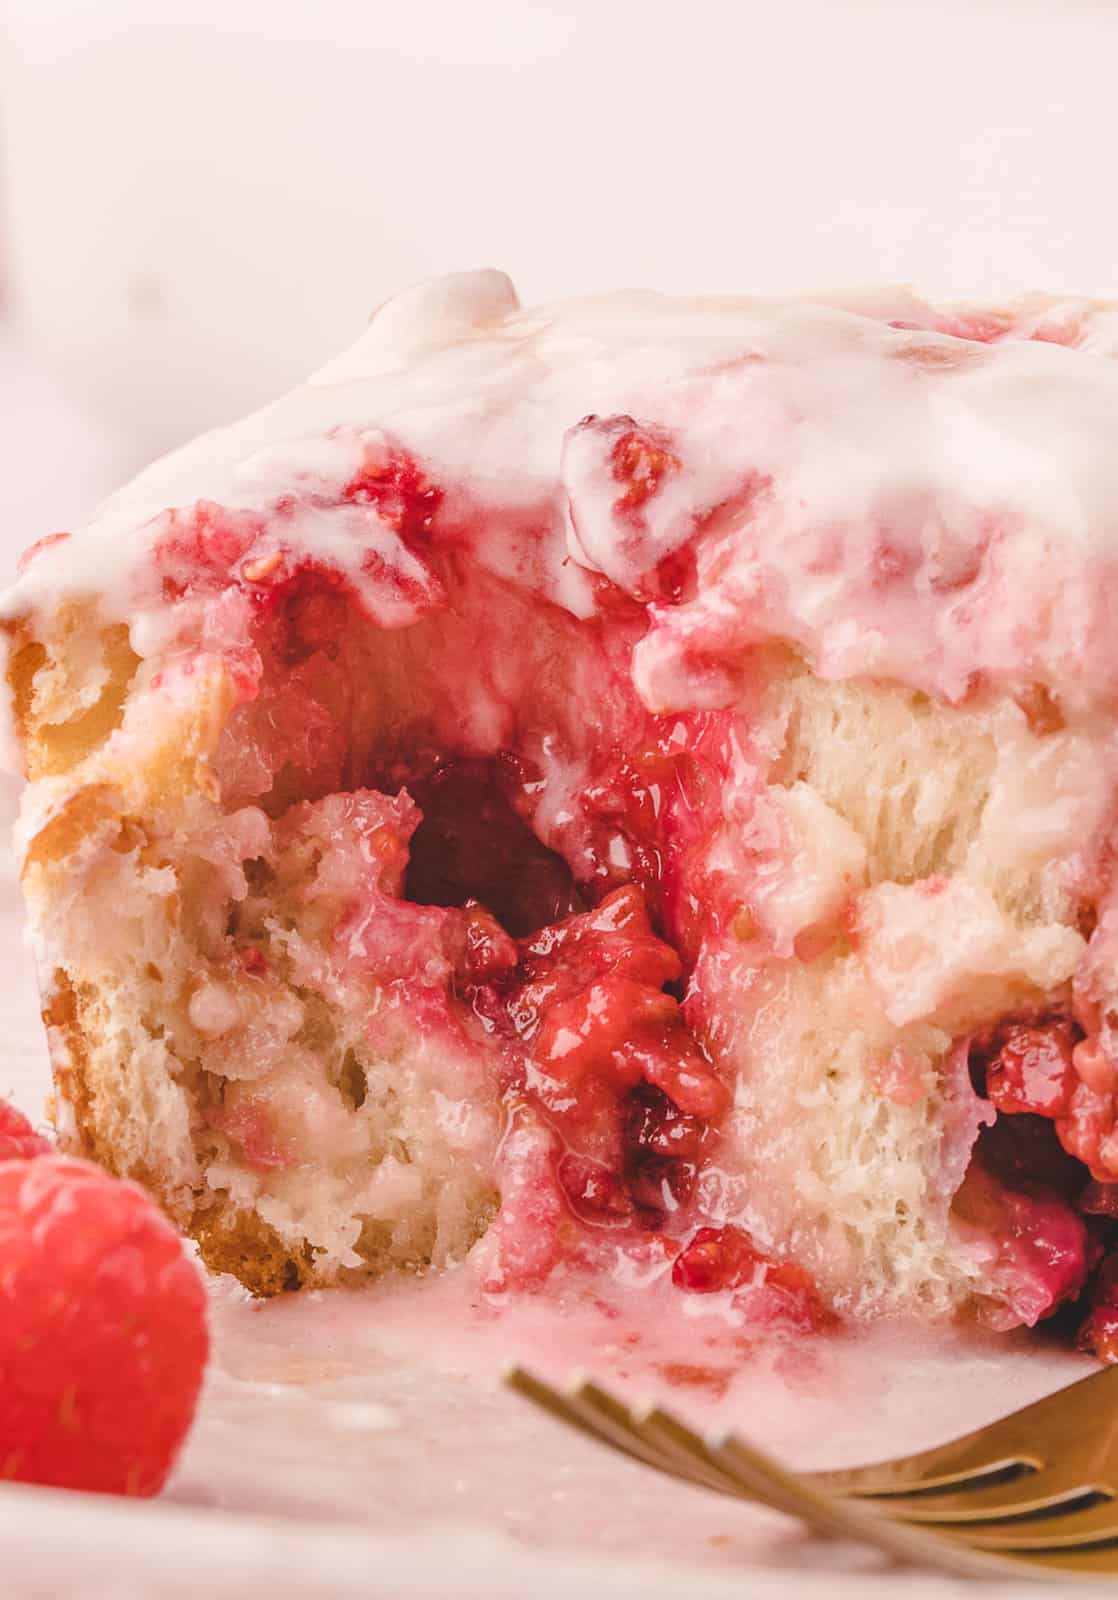 Close up of inside of one of the Raspberry Sweet Rolls showing the raspberries.